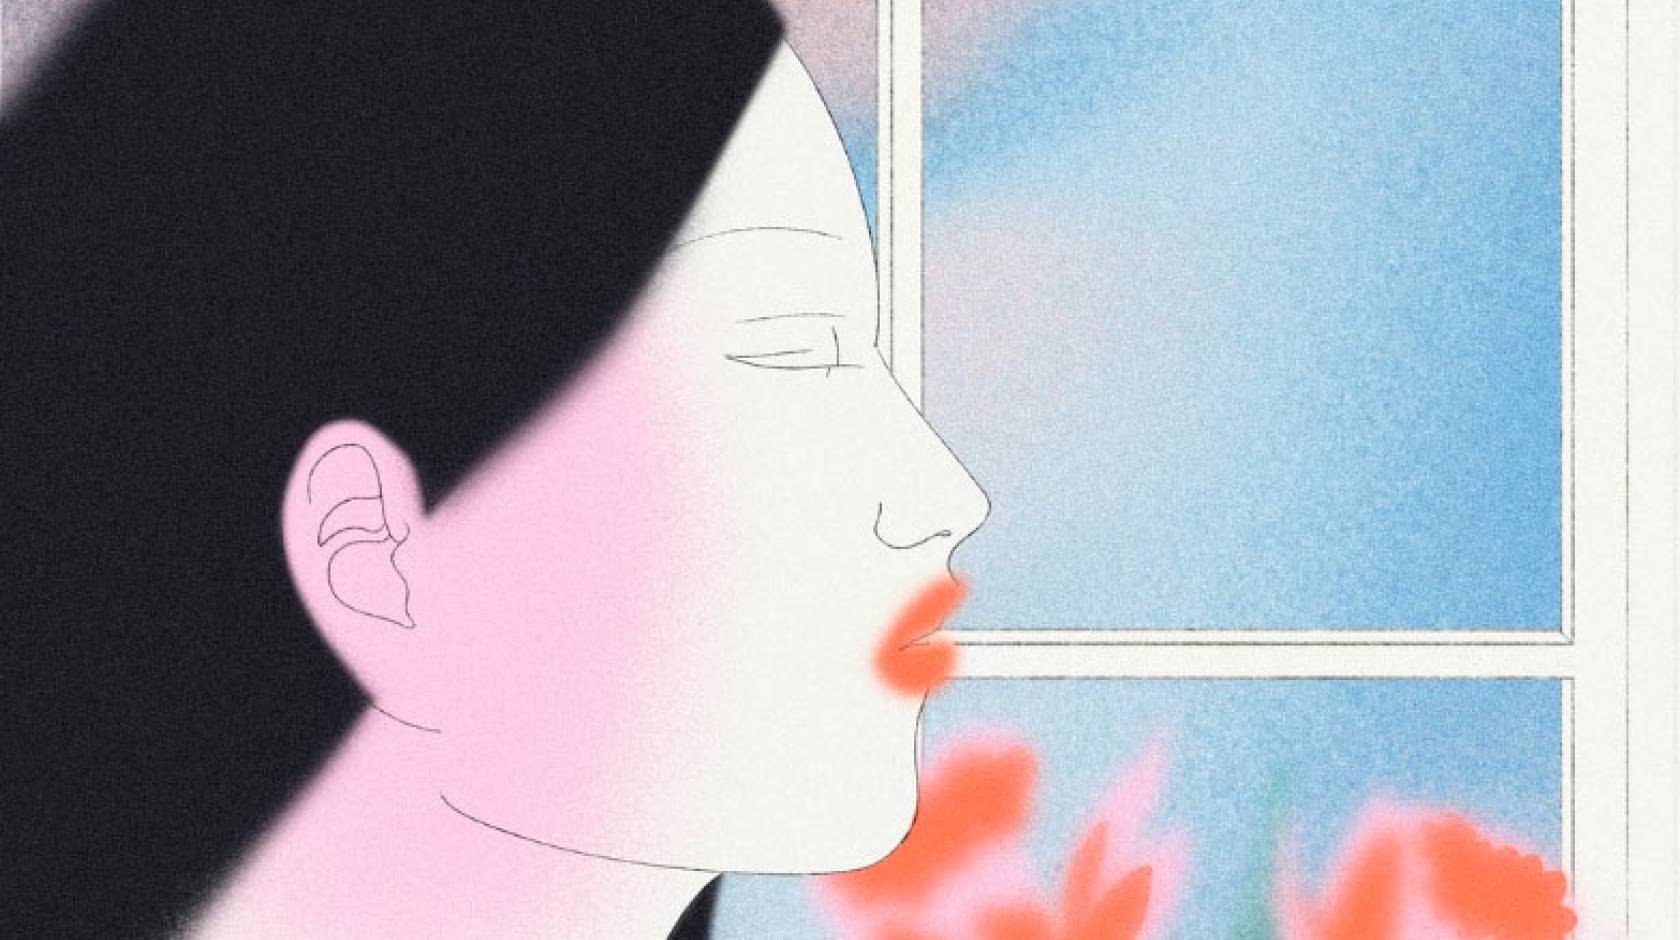 Illustration of a woman with black hair in profile in front of a window, breathing